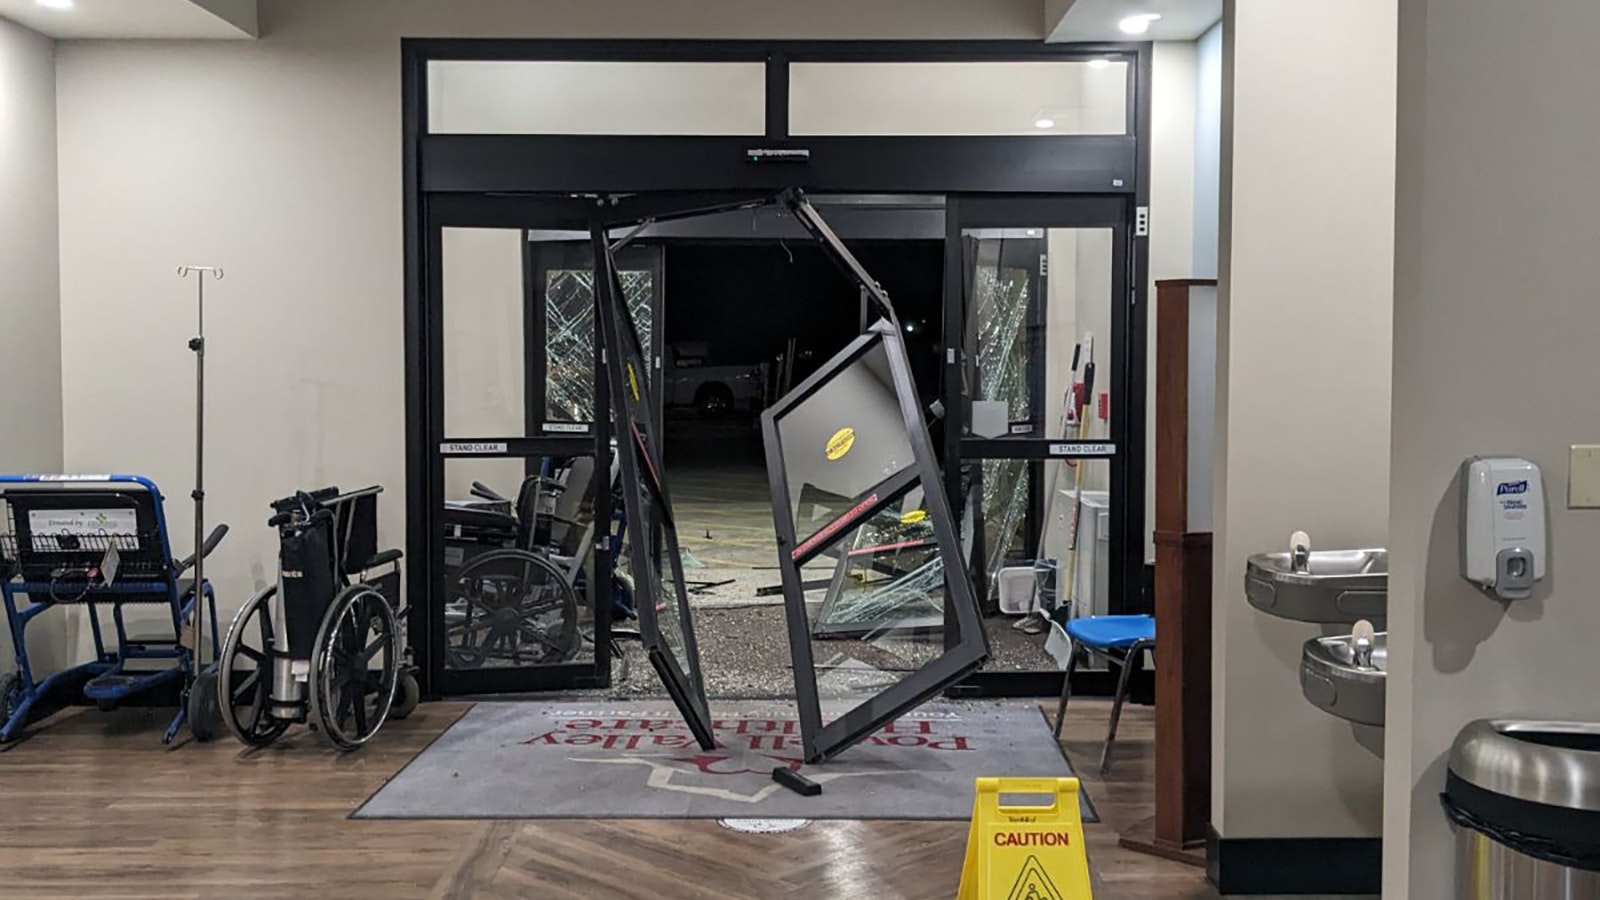 The doors of the emergency room at Powell Valley Healthcare after a car drove through them in the early morning of Jan. 27, 2023.